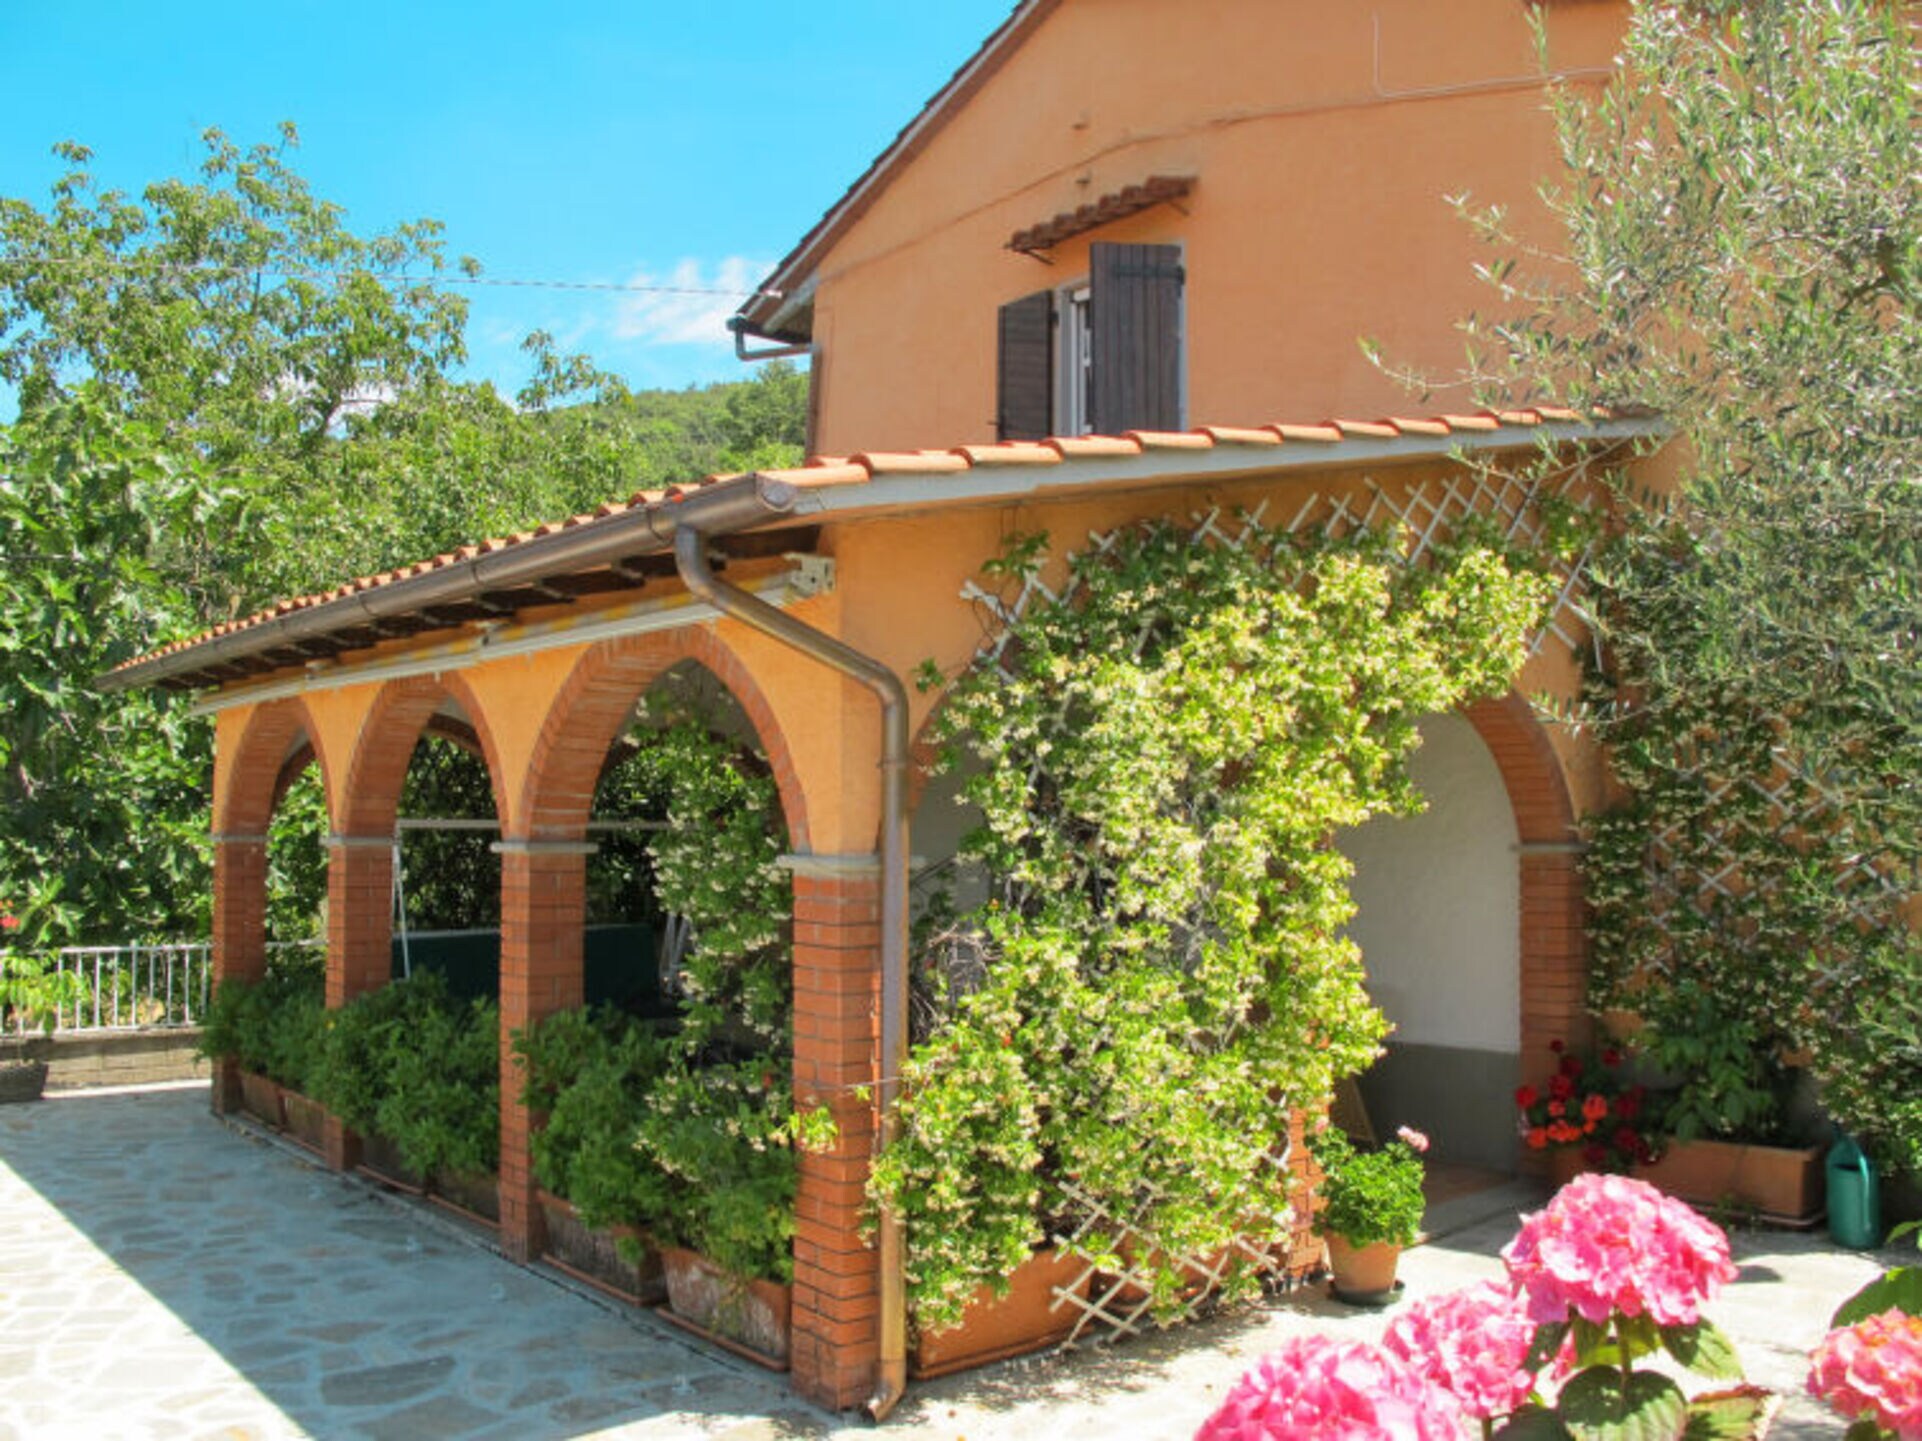 Property Image 2 - Property Manager Villa with 3 Bedrooms, Arezzo Villa 1000